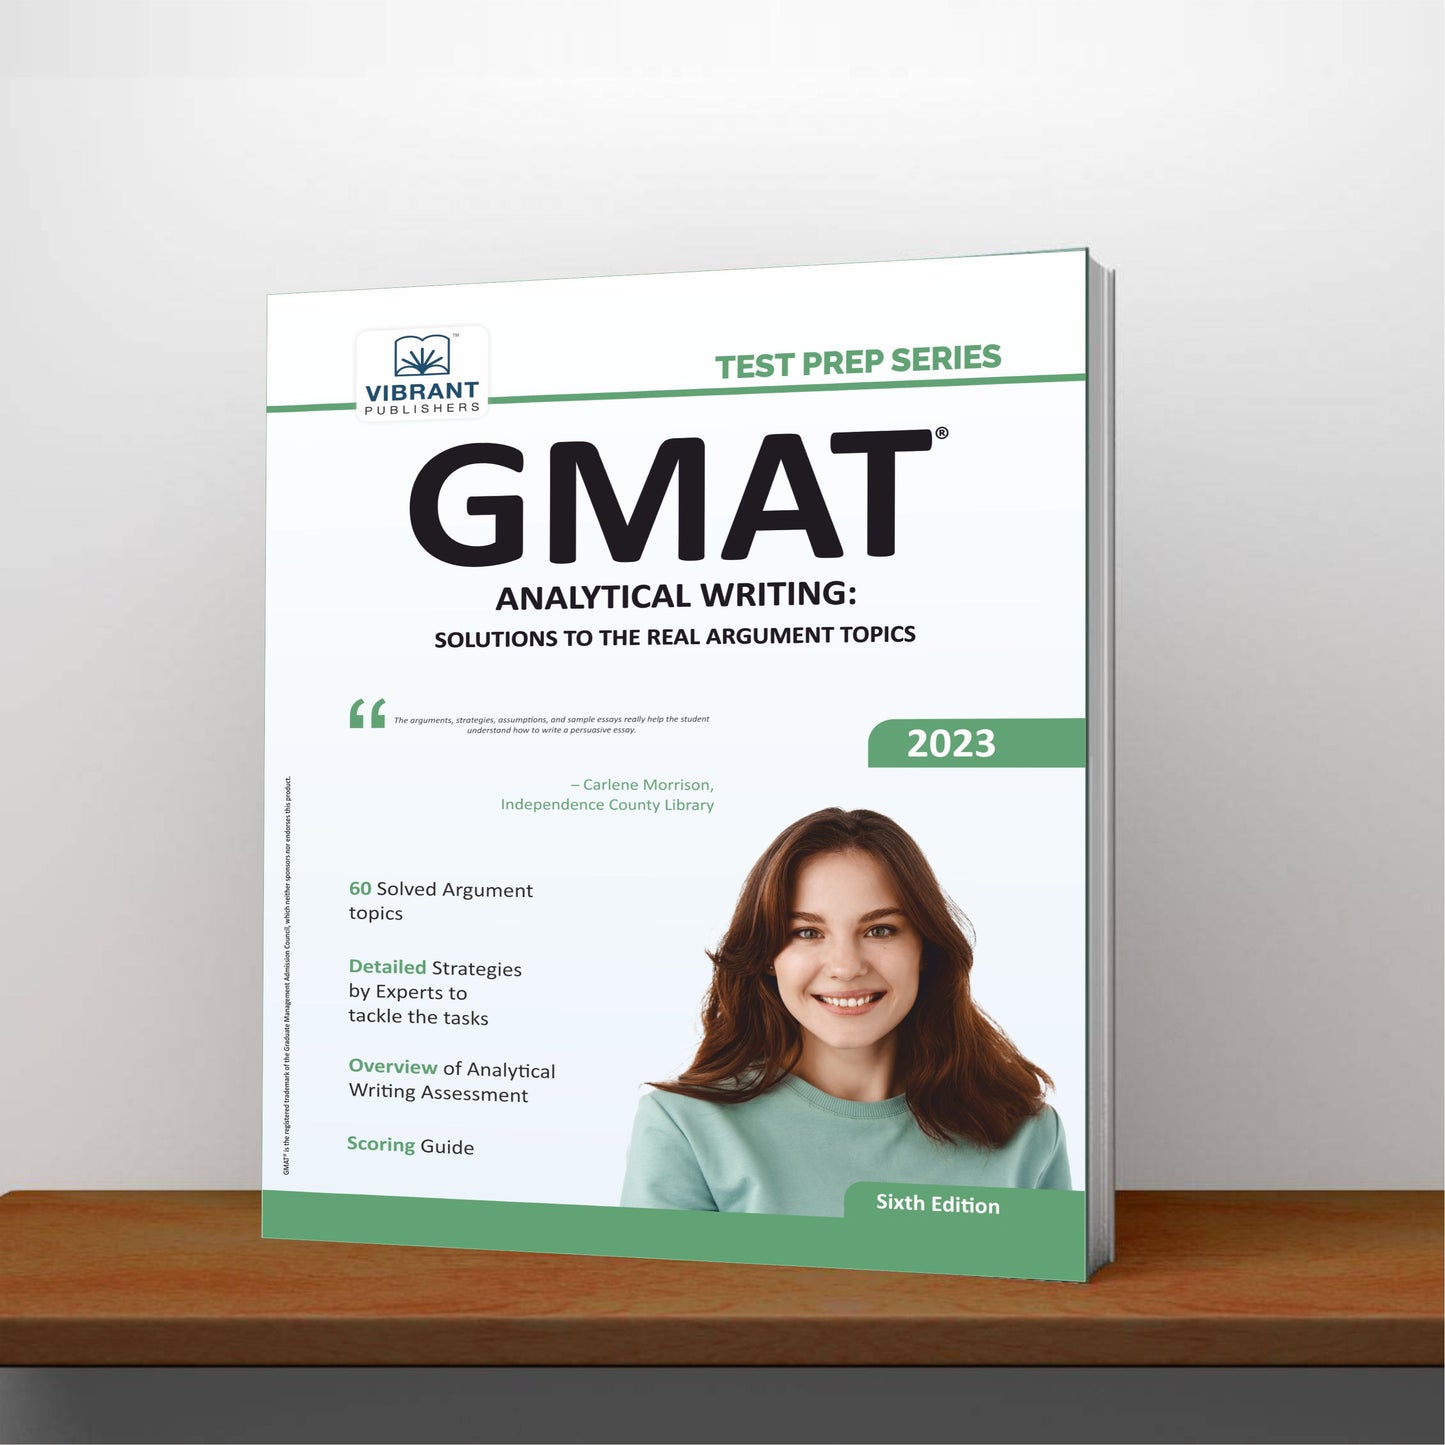 GMAT Analytical Writing: Solutions to the Real Argument Topics (2023 Edition)